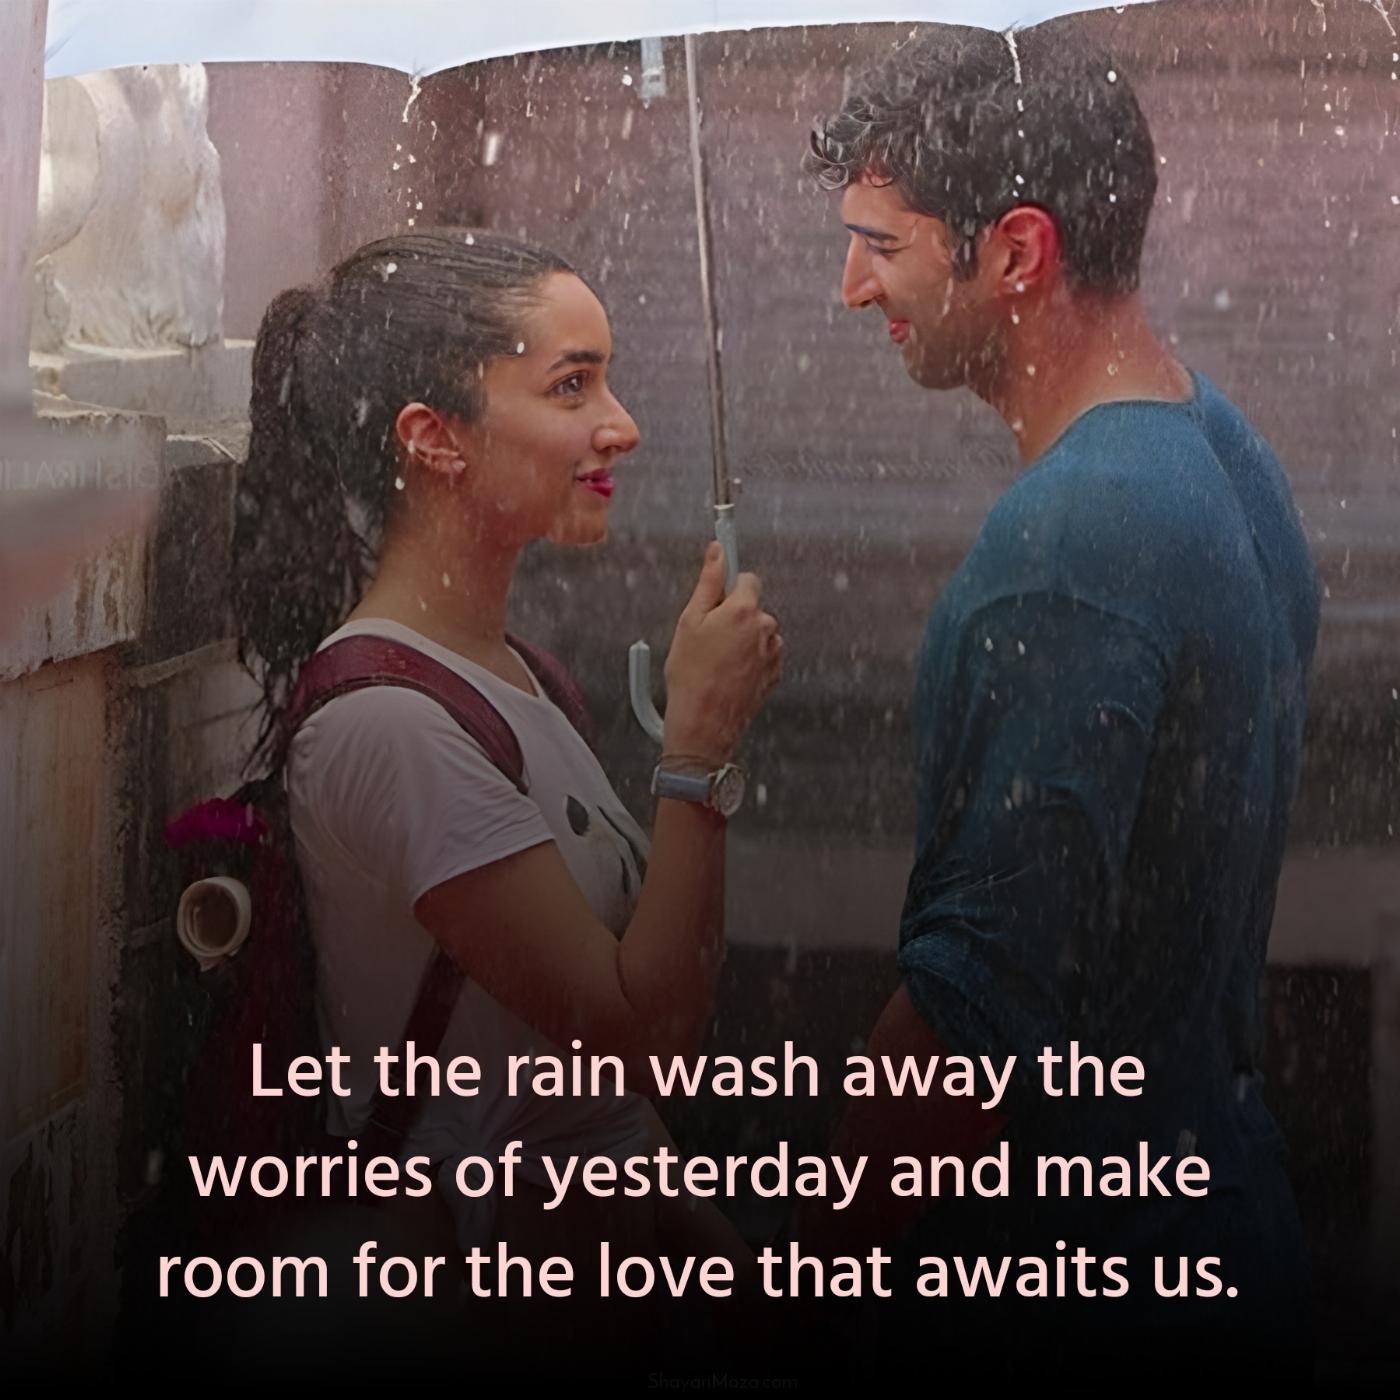 Let the rain wash away the worries of yesterday and make room for the love